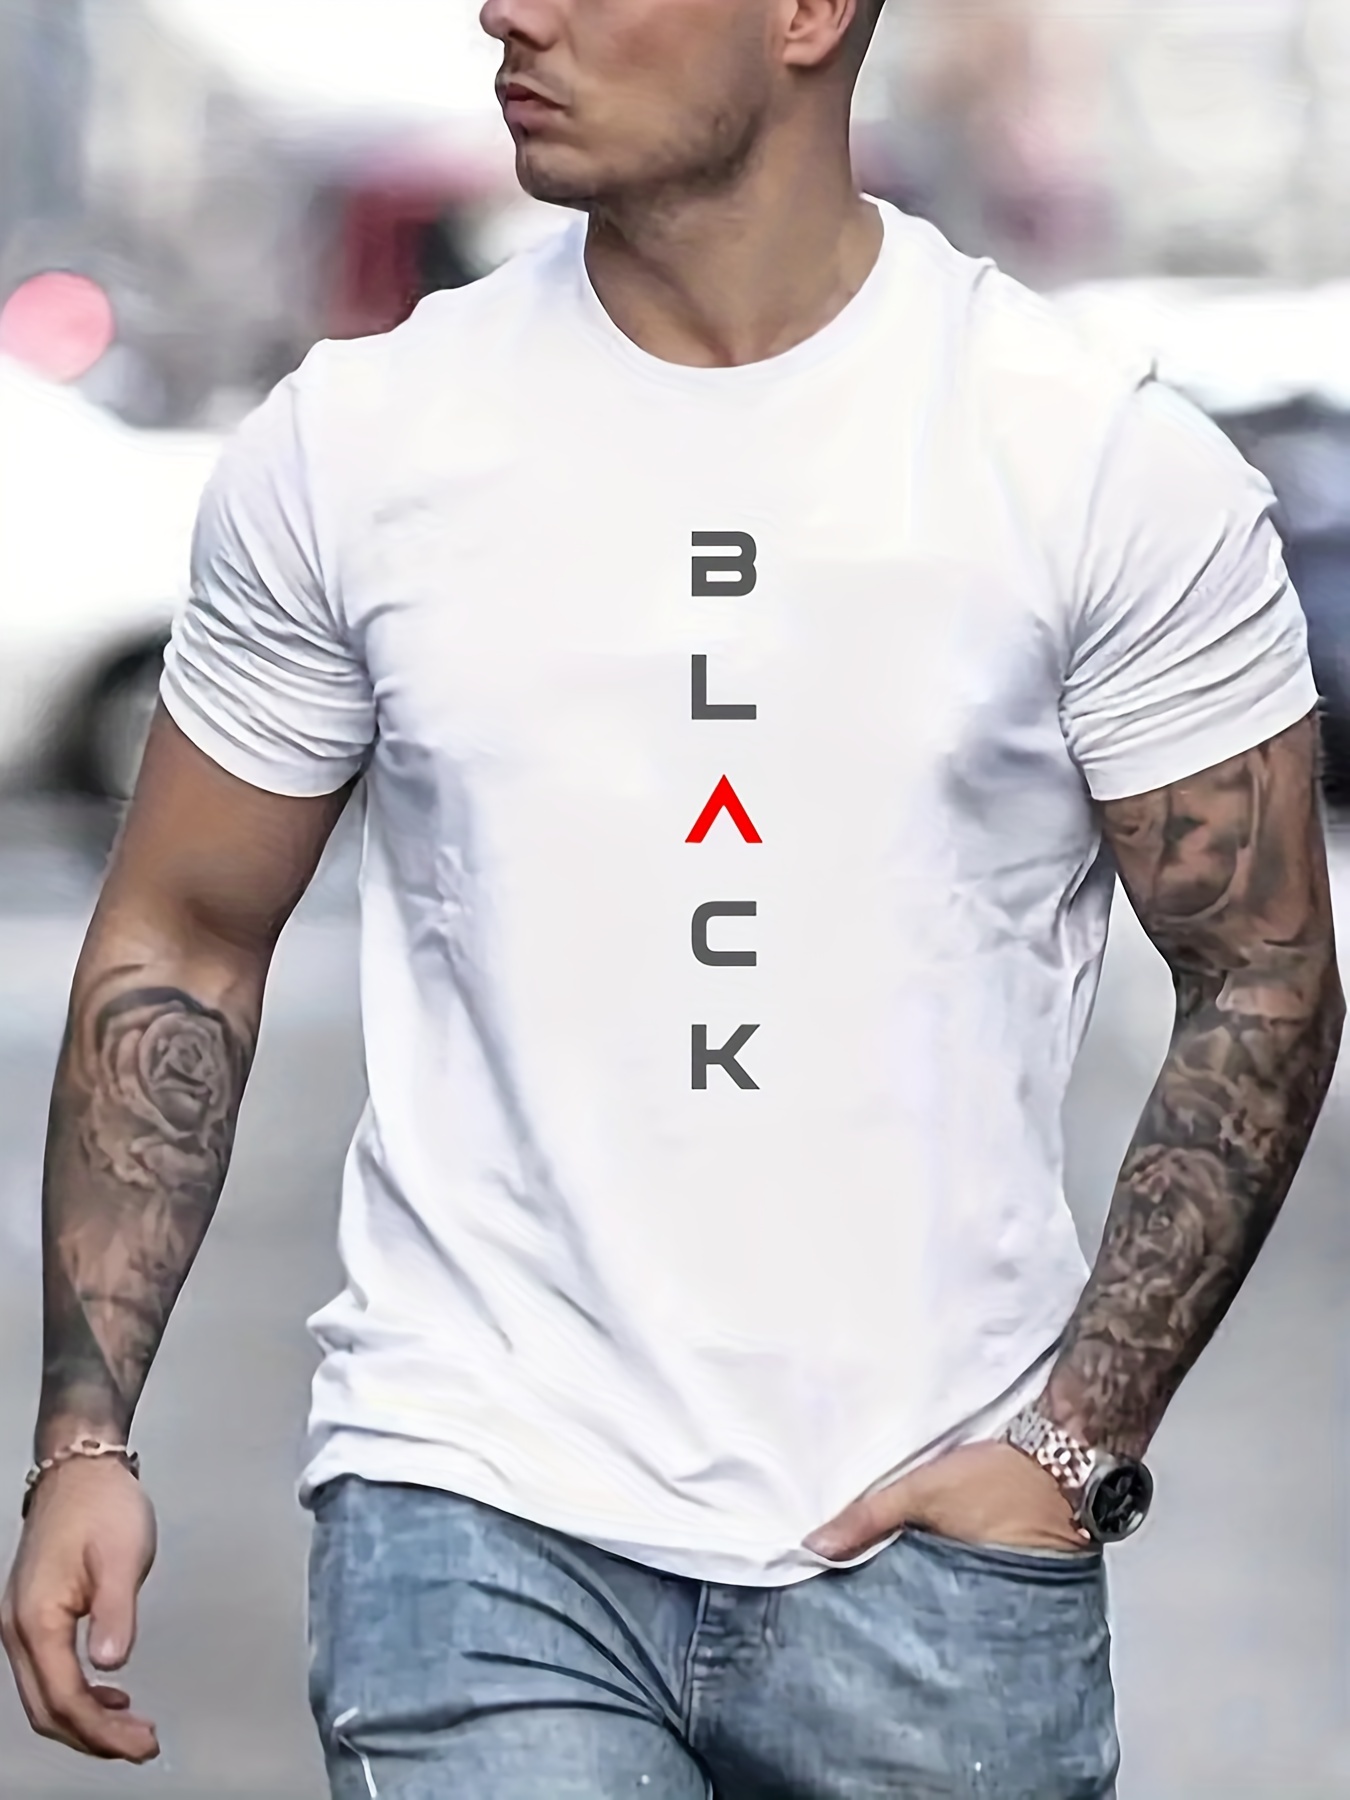 black print tee shirt tee for men casual short sleeve t shirt for summer spring fall tops as gifts details 5